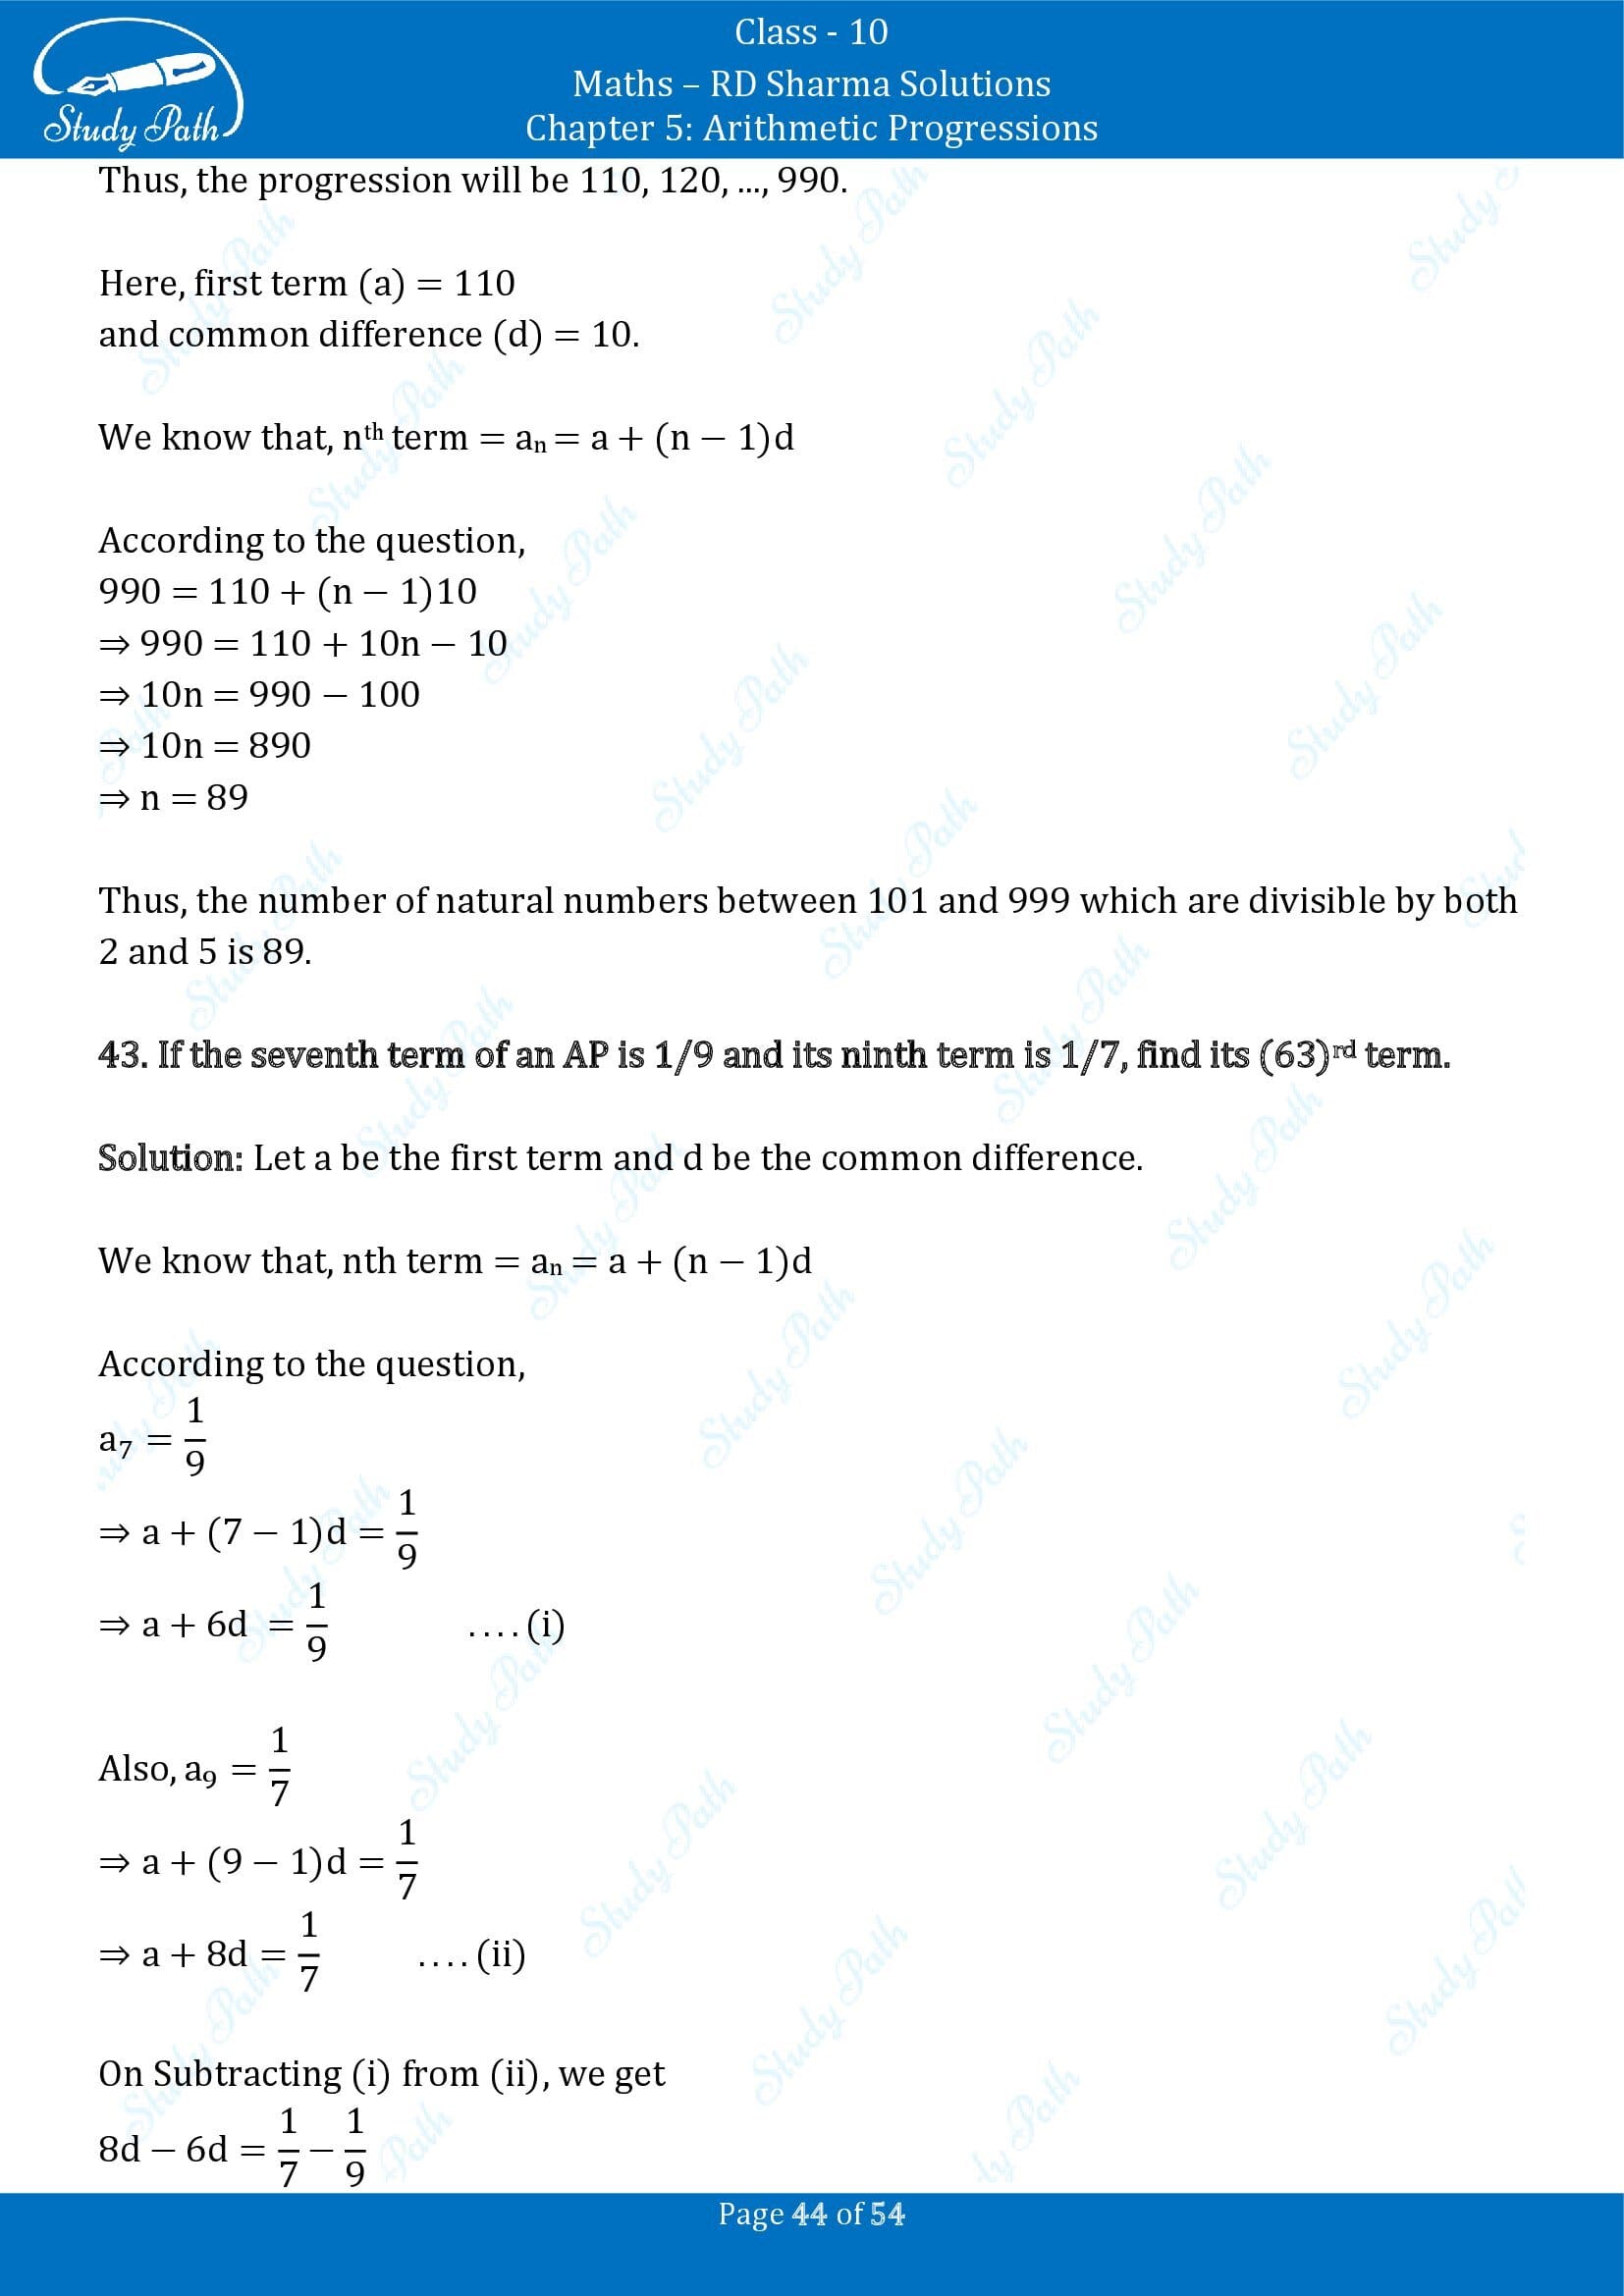 RD Sharma Solutions Class 10 Chapter 5 Arithmetic Progressions Exercise 5.4 00044